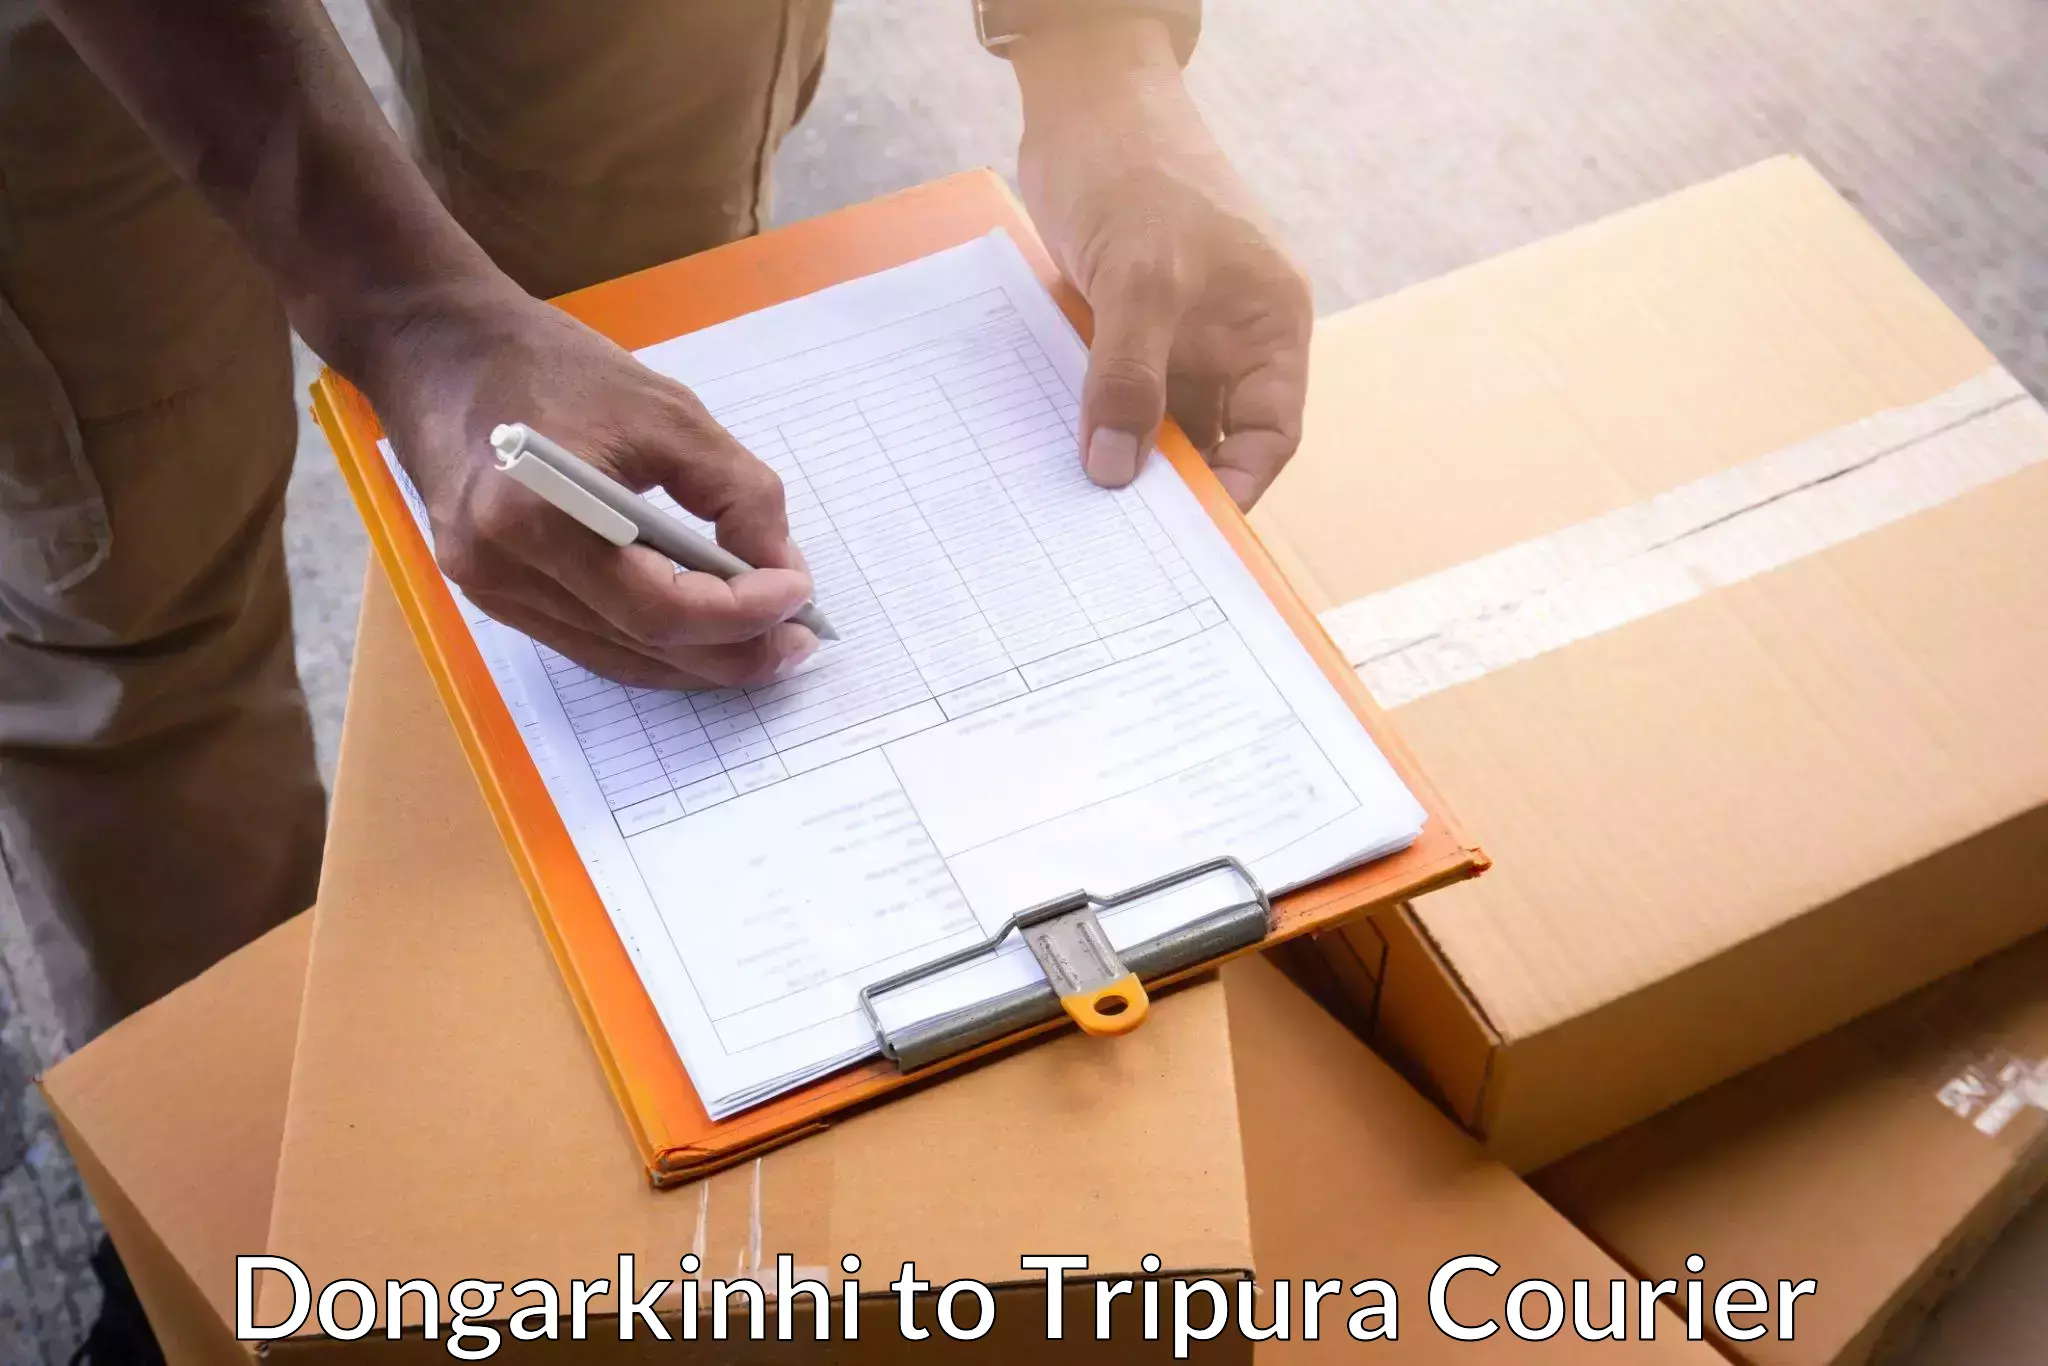 Large package courier Dongarkinhi to Tripura